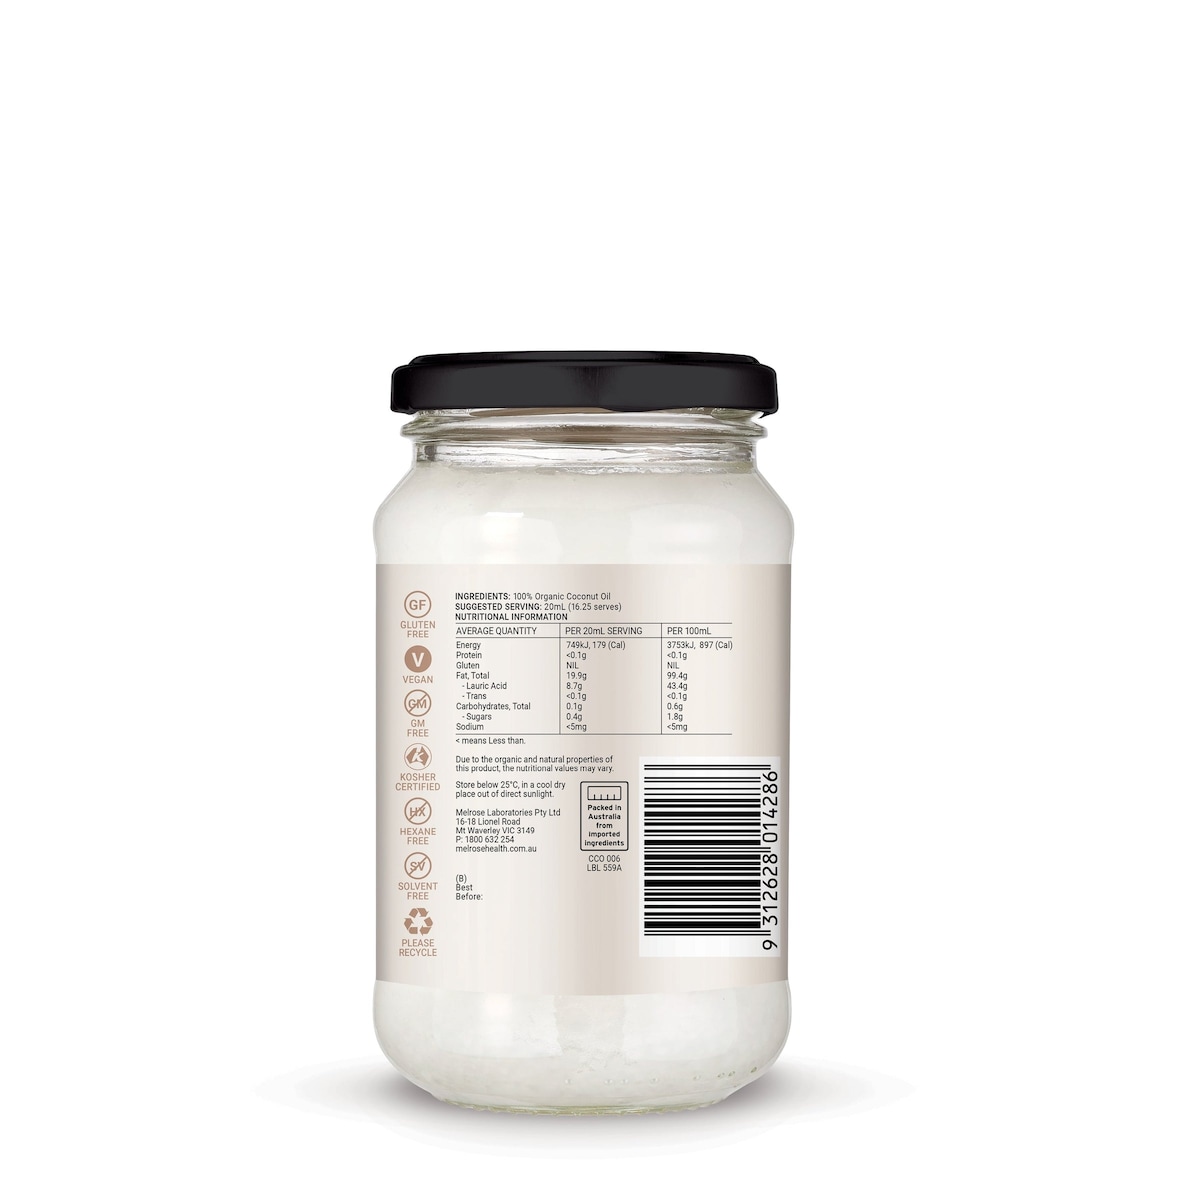 Melrose Organic Flavour Free Coconut Oil 325ml